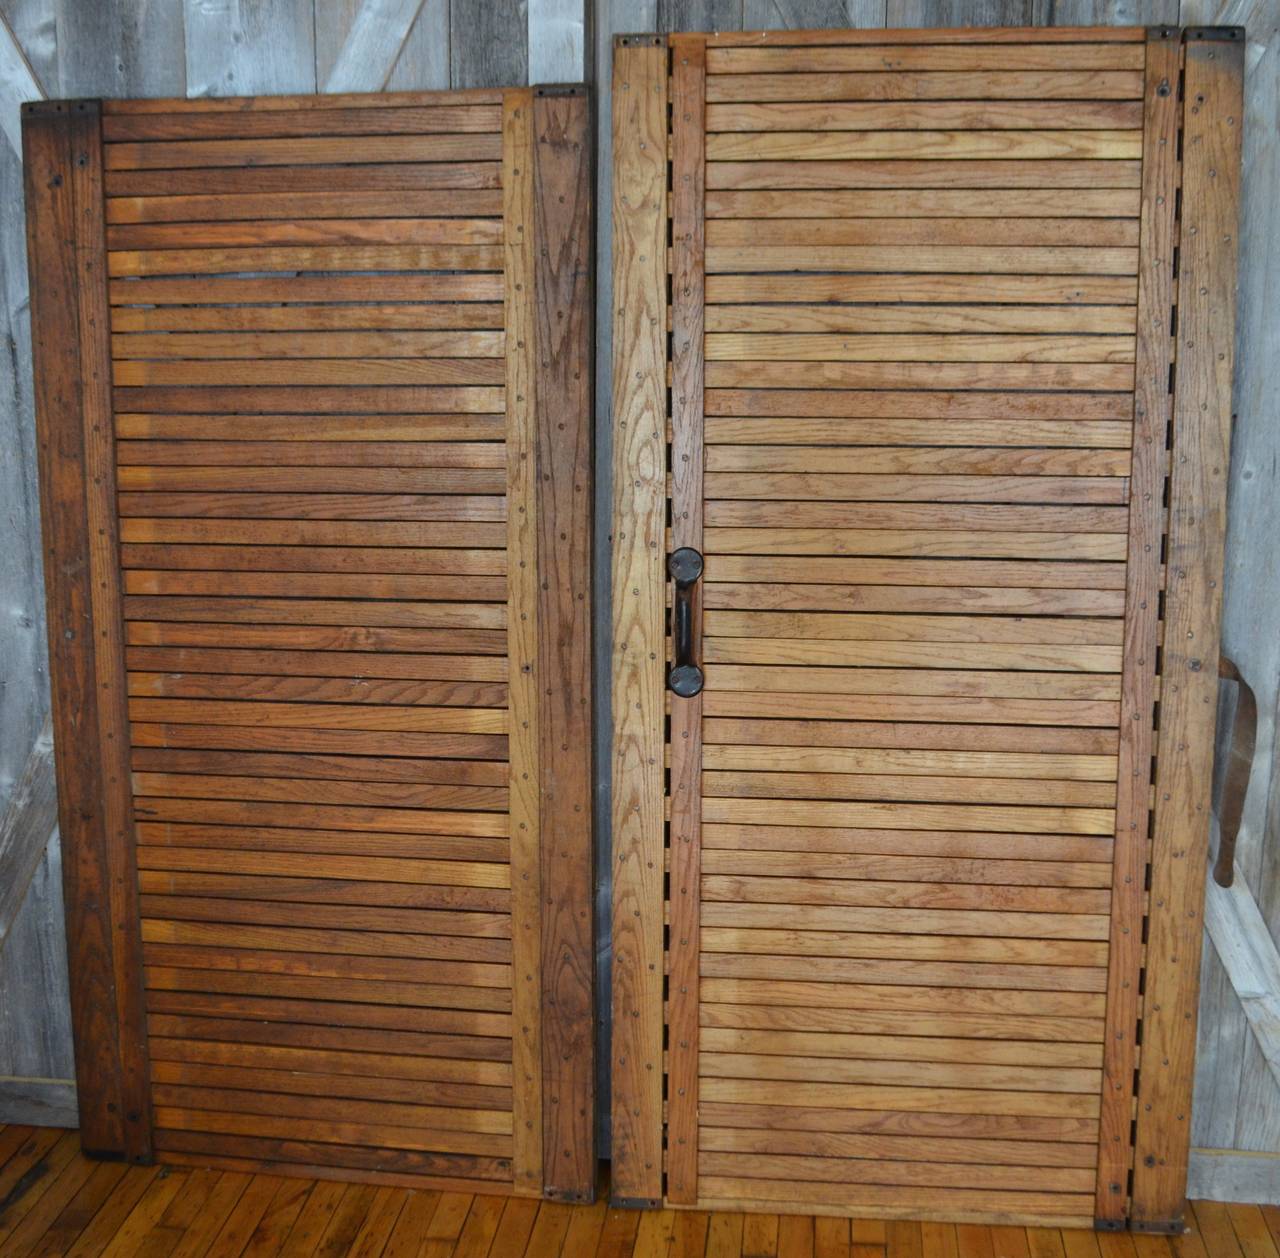 Freight Elevator Gates of Oak as Room Dividers, Sliding Doors, or Wall Art 1